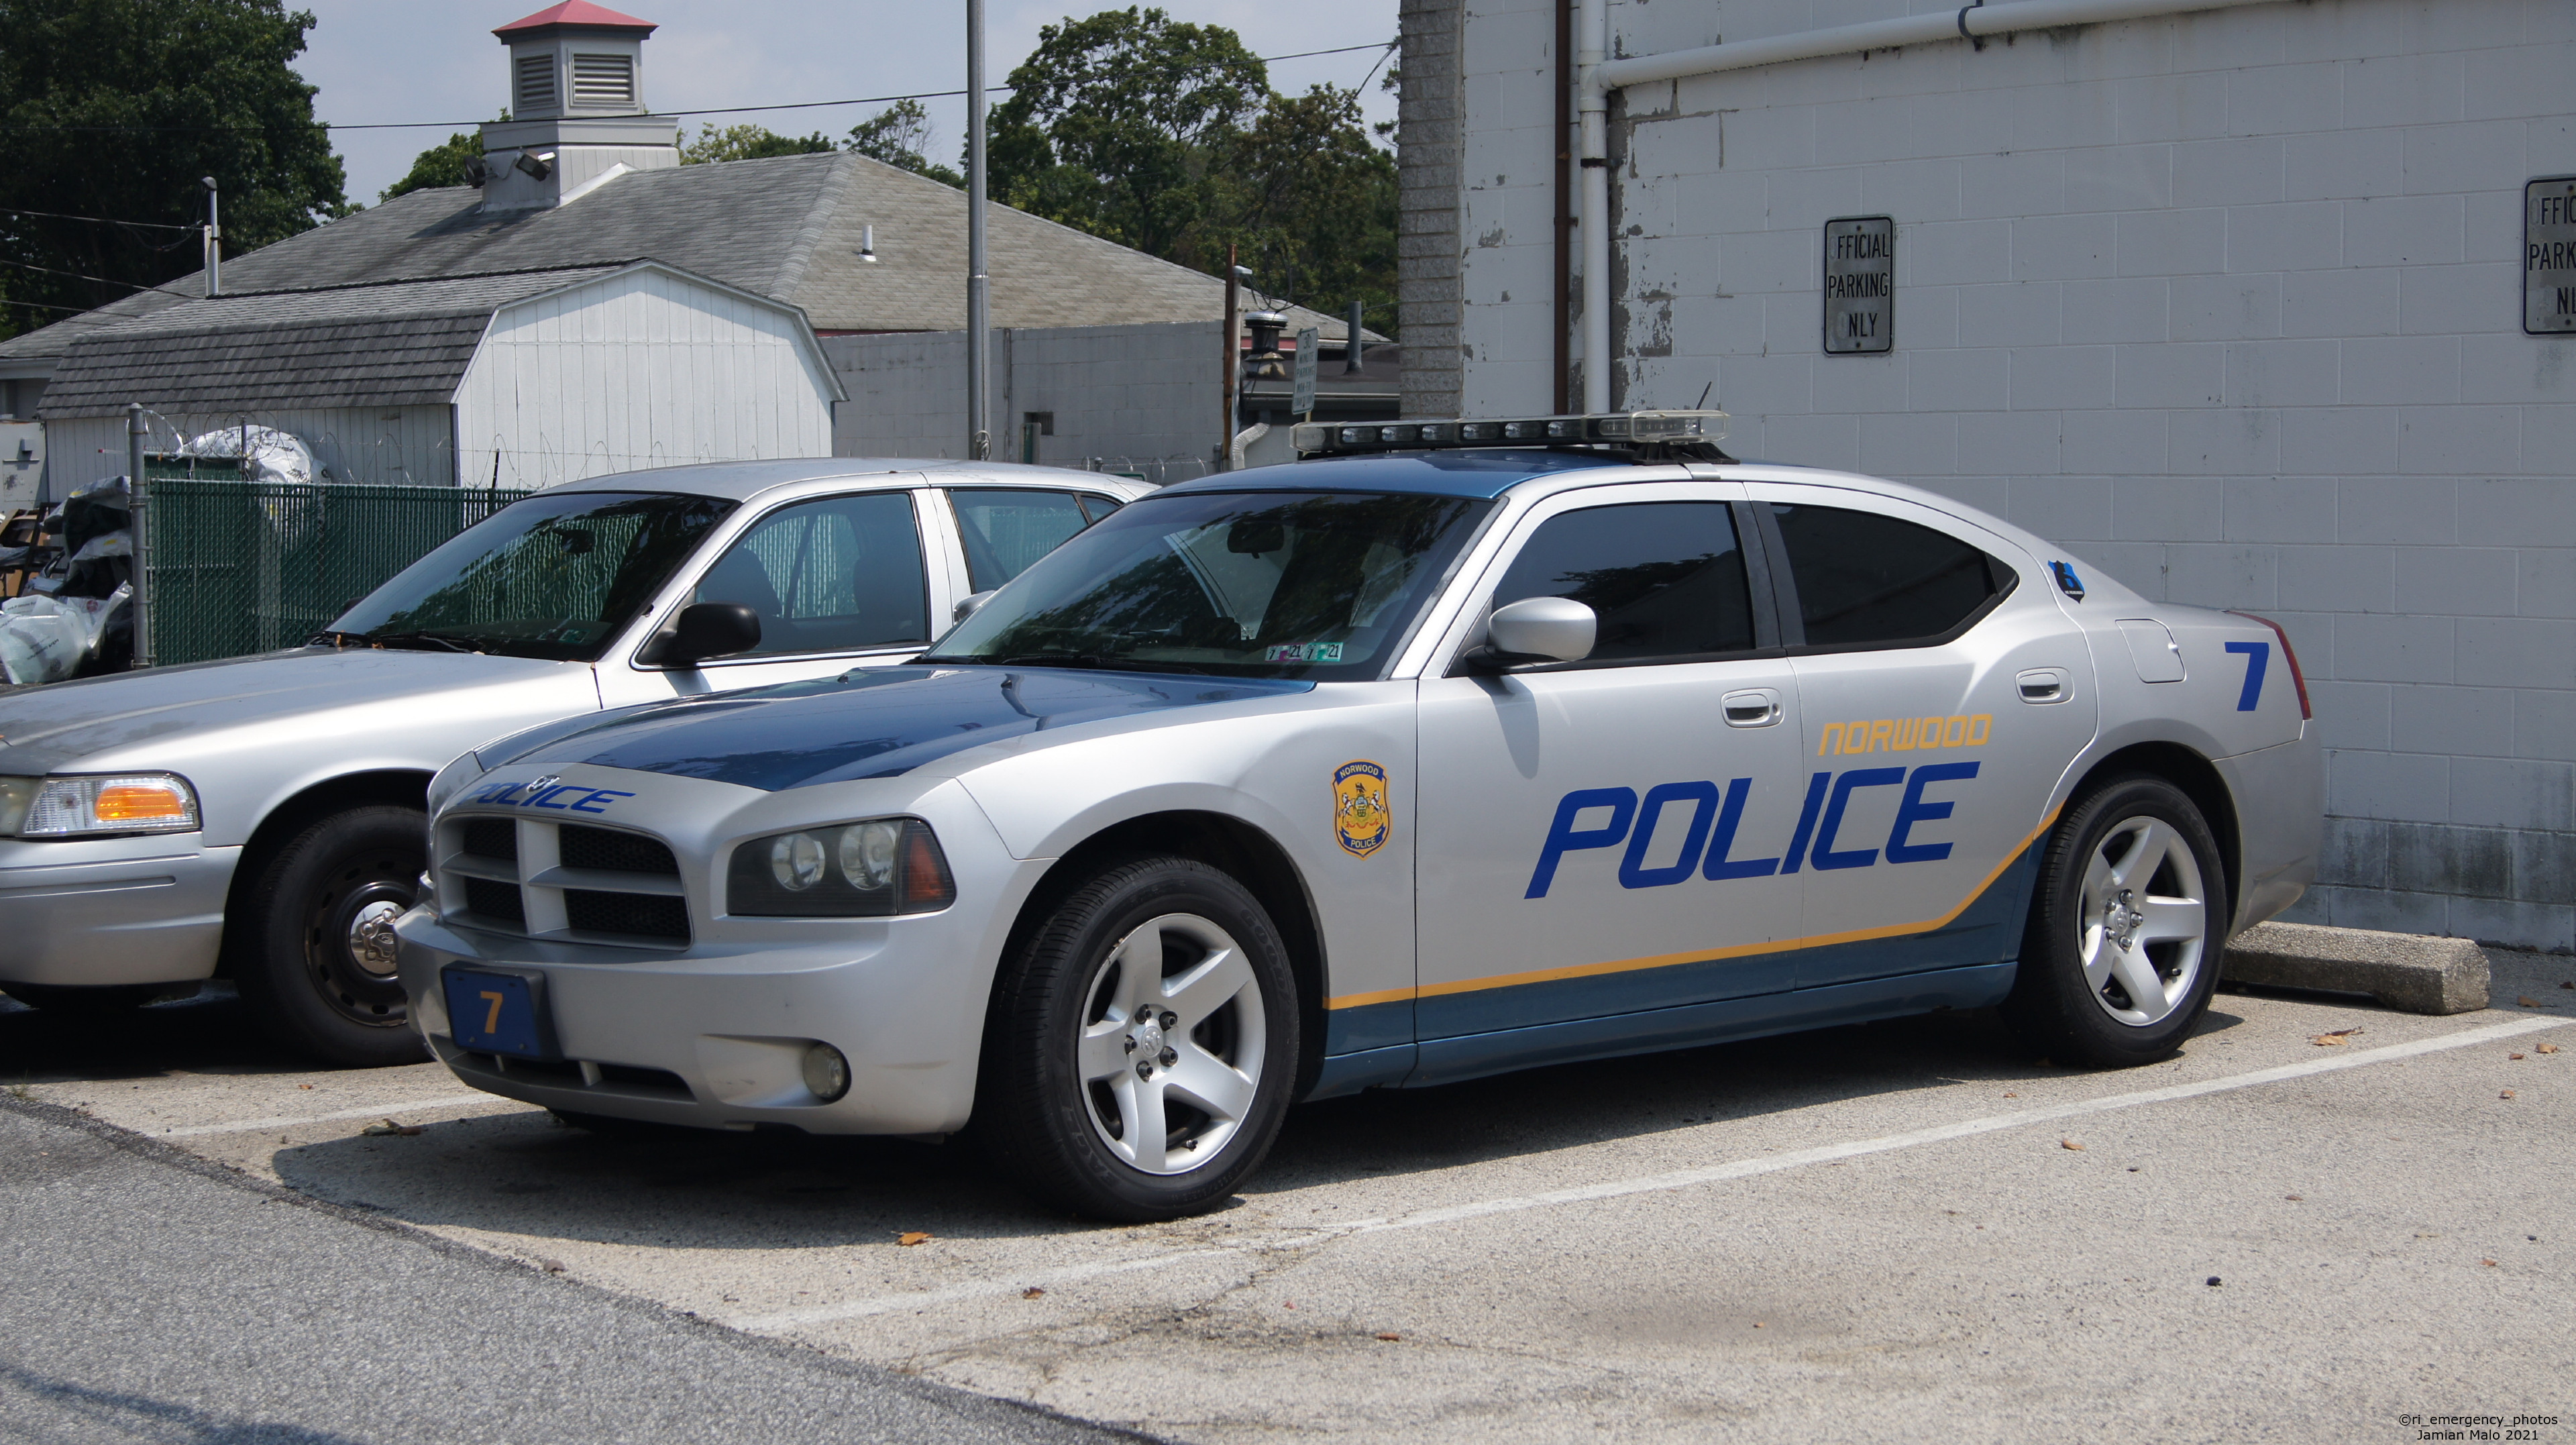 A photo  of Norwood Police
            Car 7, a 2006-2010 Dodge Charger             taken by Jamian Malo